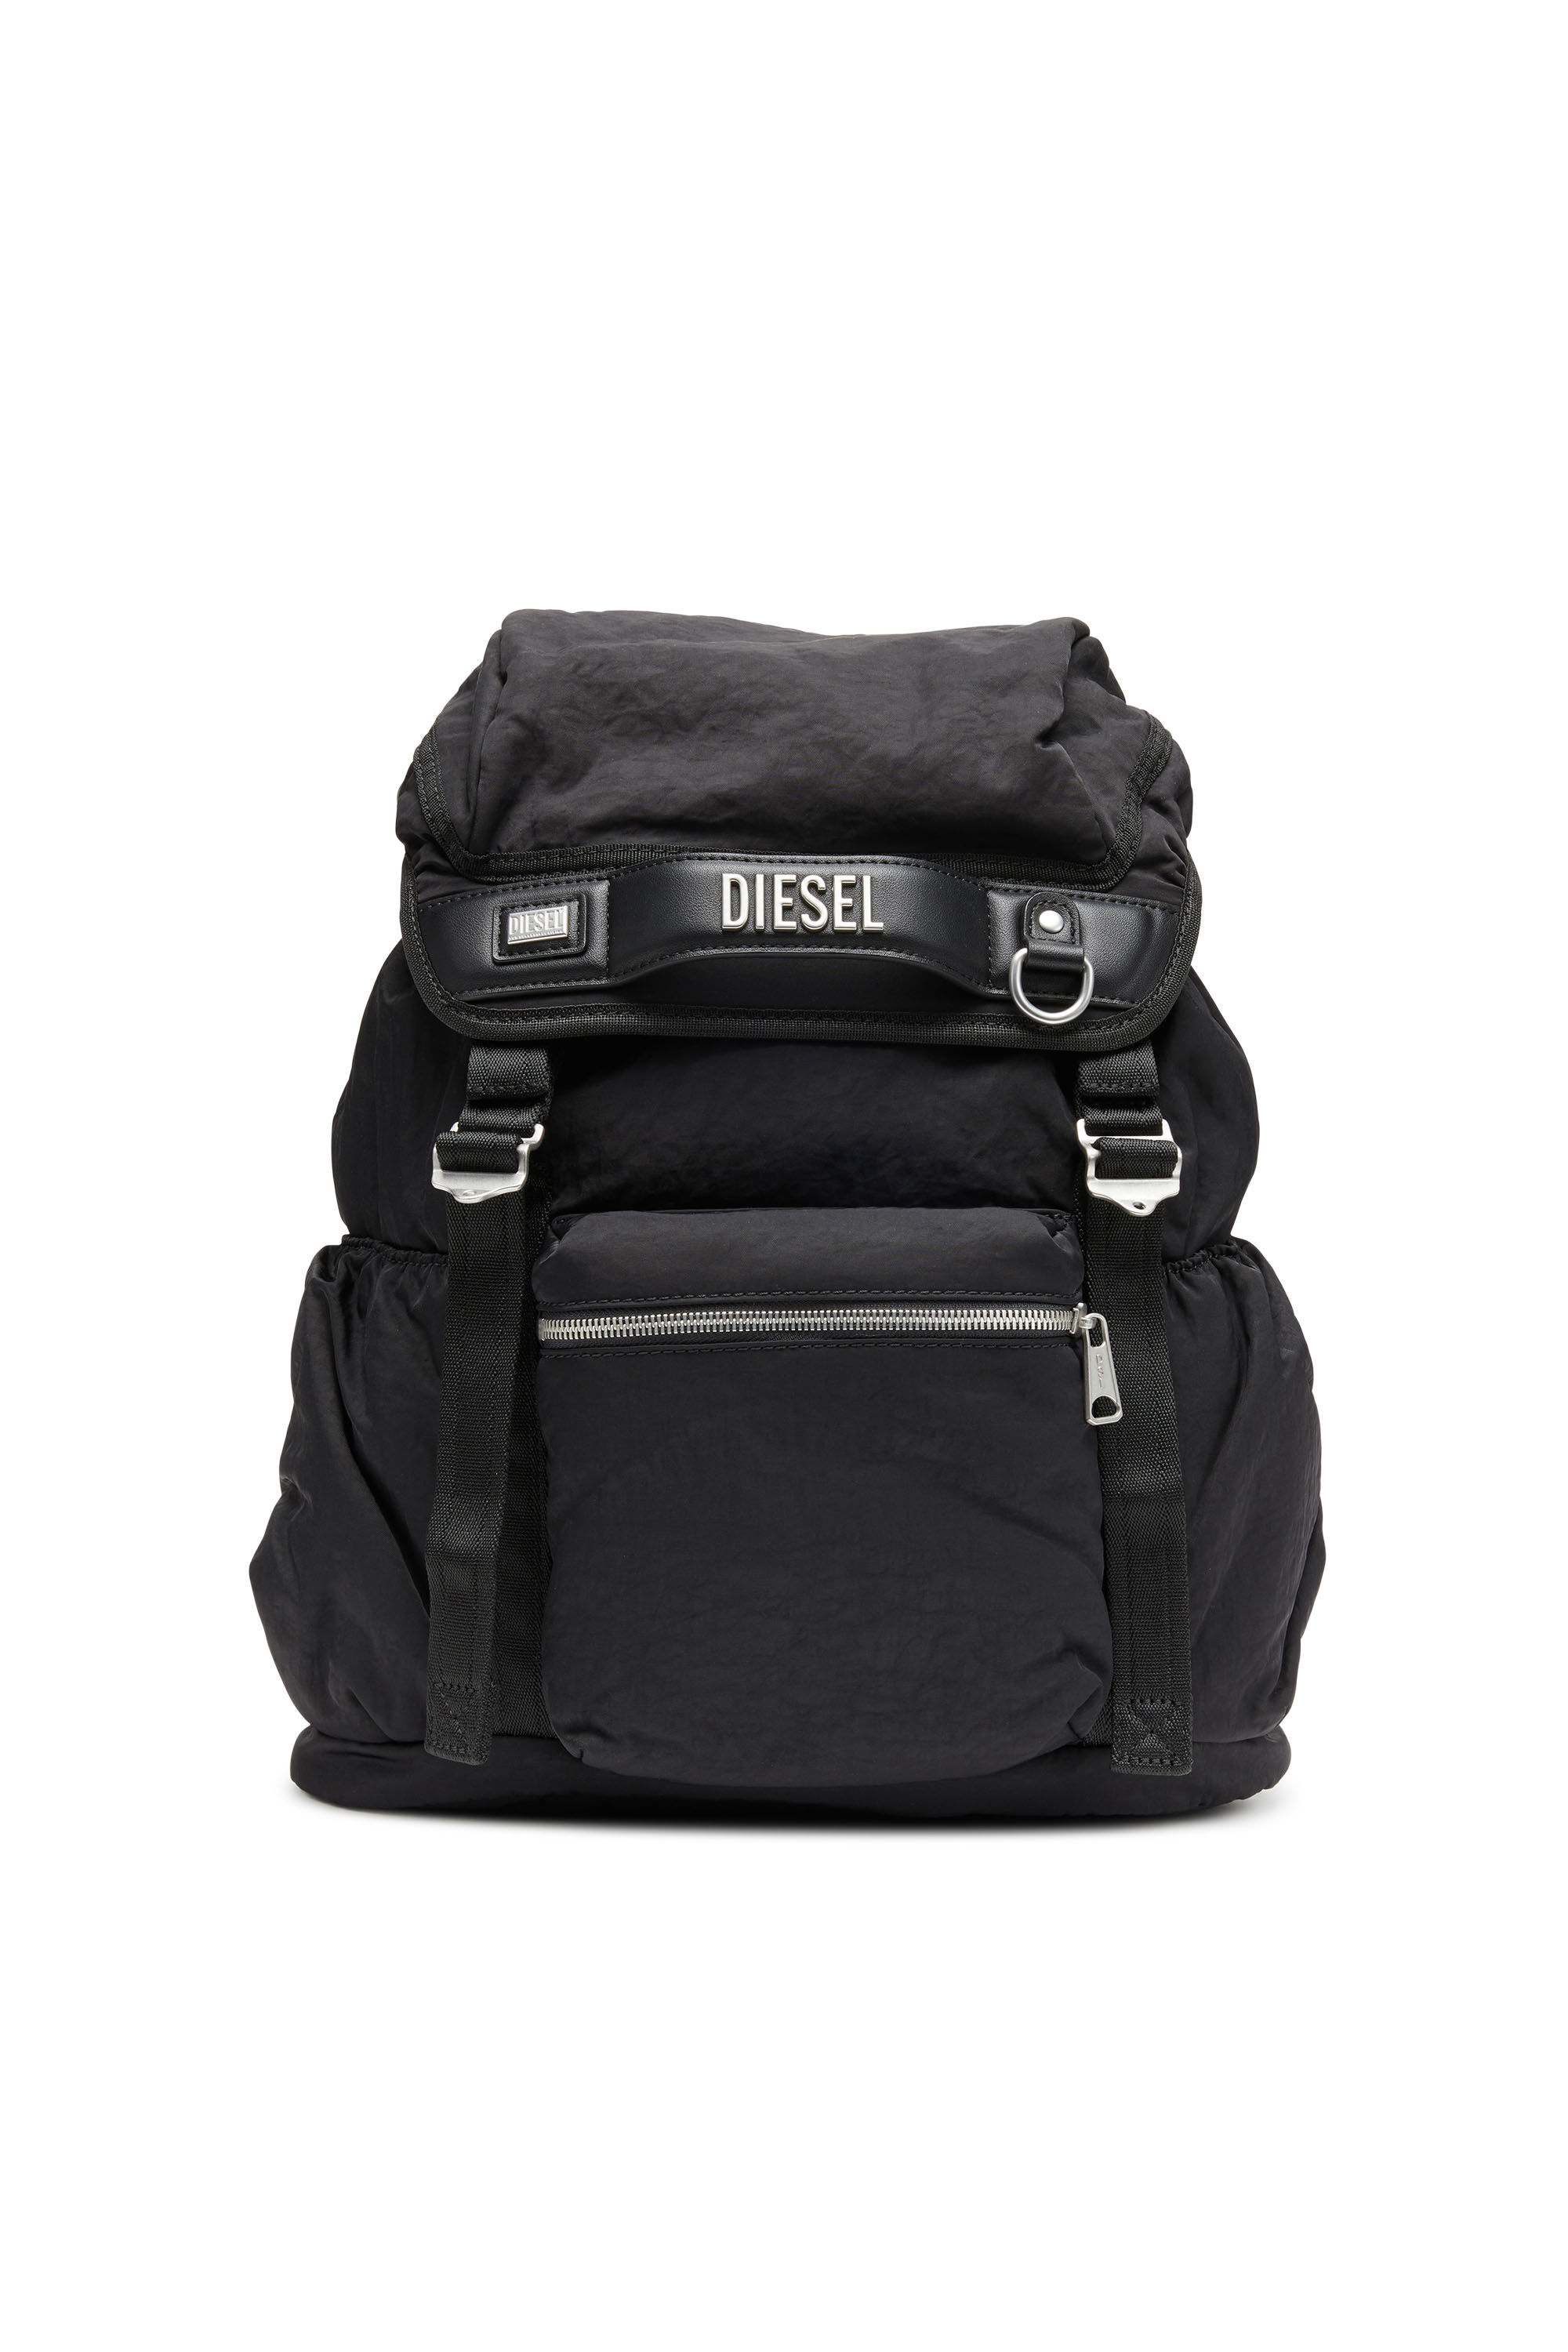 LOGOS BACKPACK L Logos Backpack L - Large backpack in recycled 